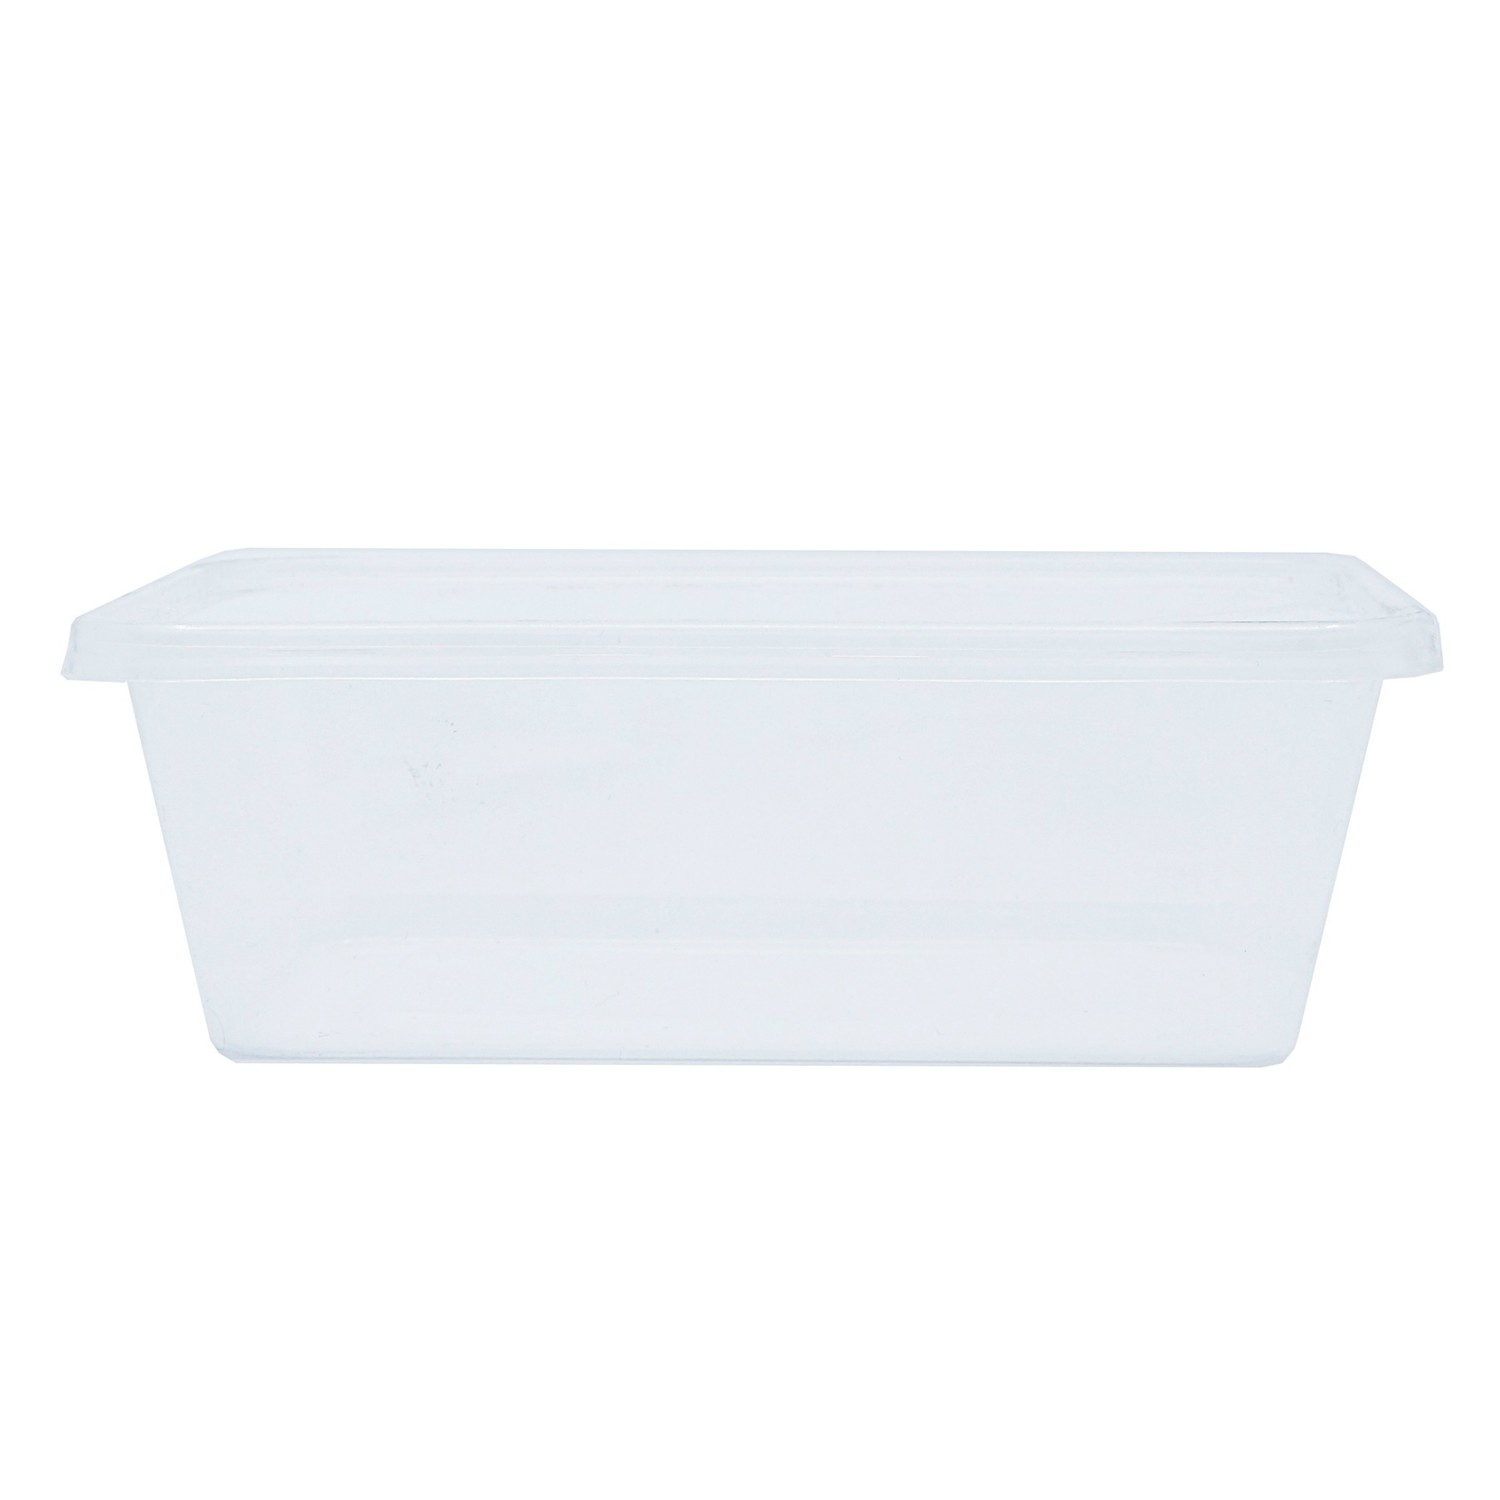 750ml, Rectangular Microwaveable Container